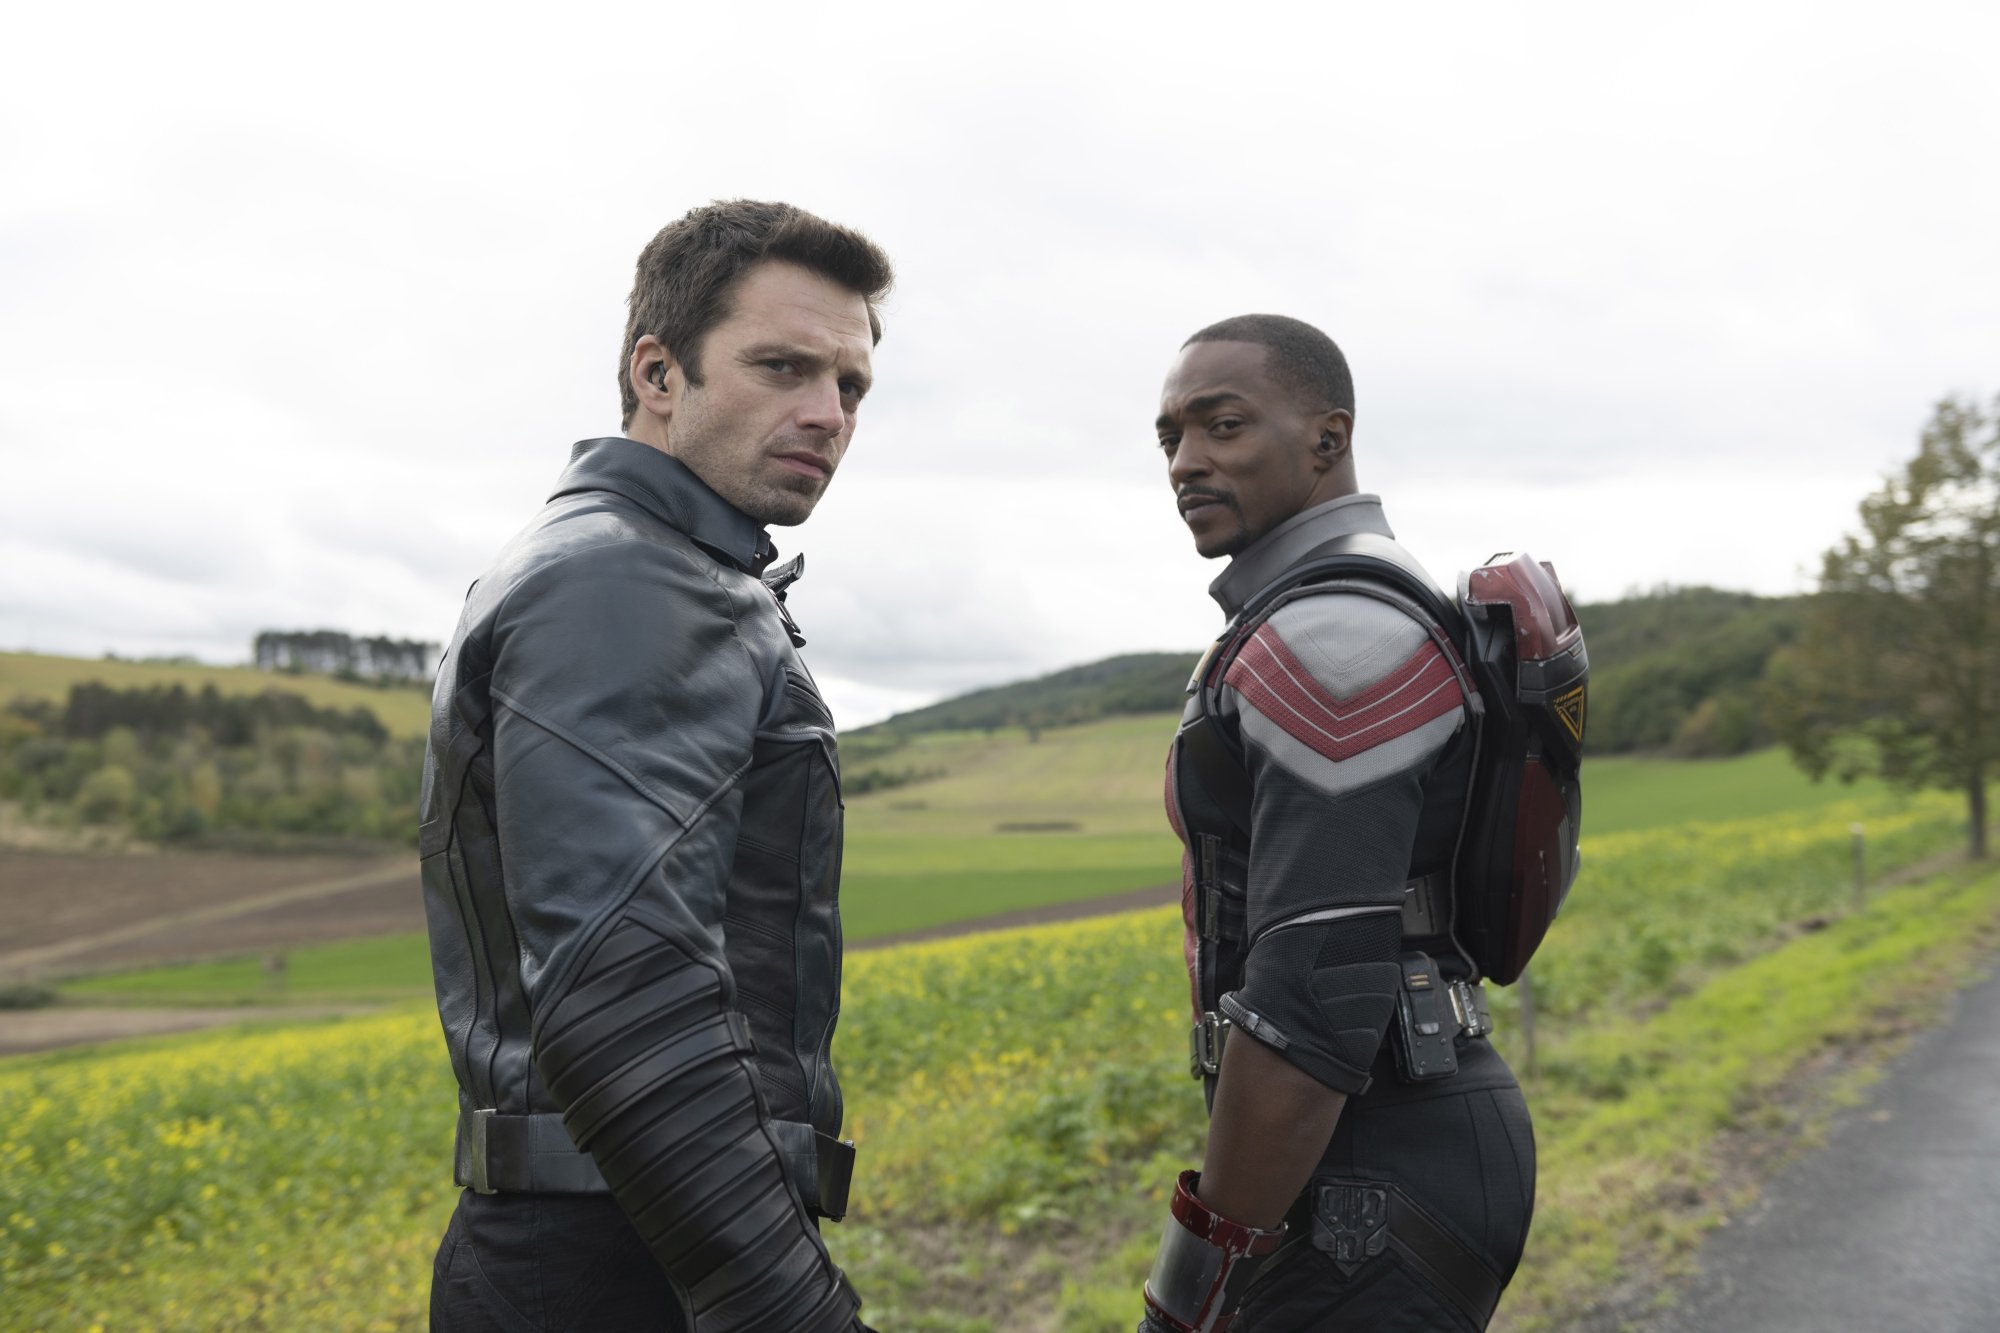 Emmys 2021: How Many Nominations Did ‘The Falcon and the Winter Soldier’ Receive?